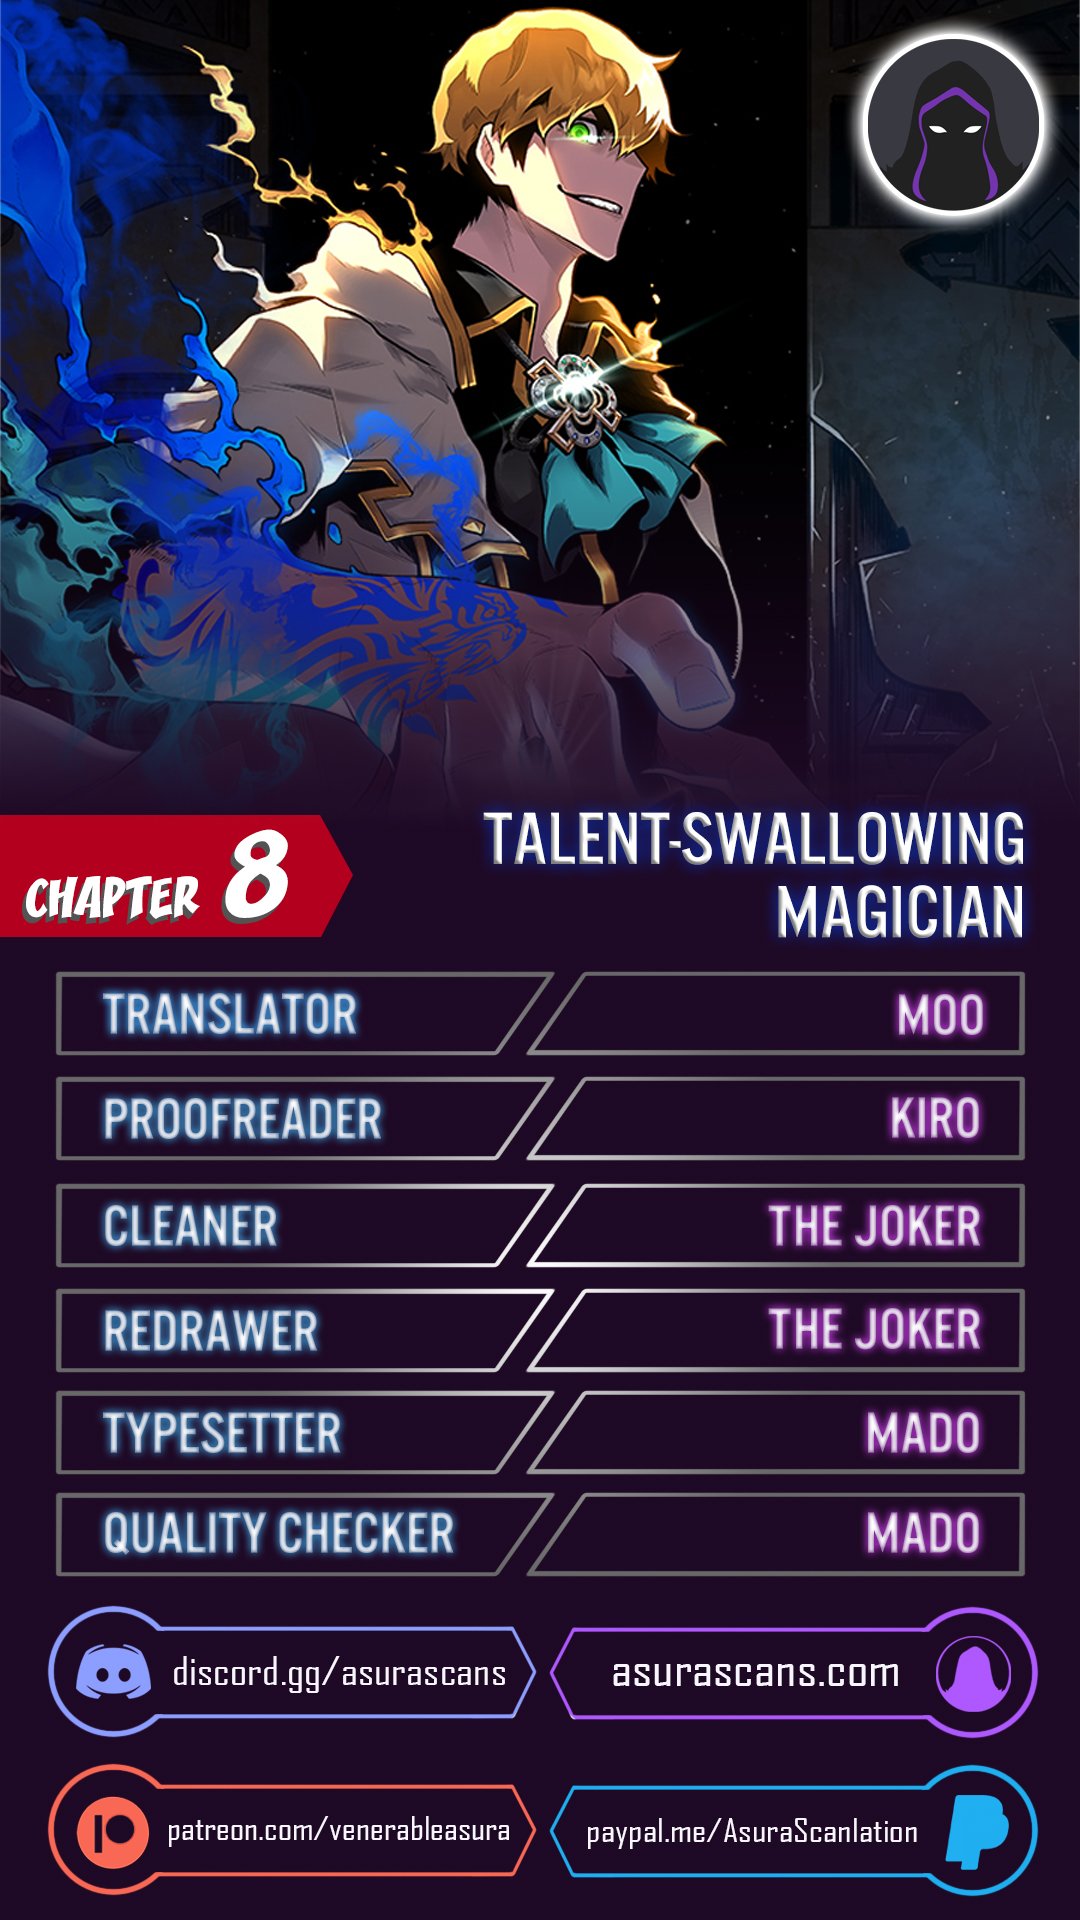 Talent-Swallowing Magician - Chapter 15406 - Image 1